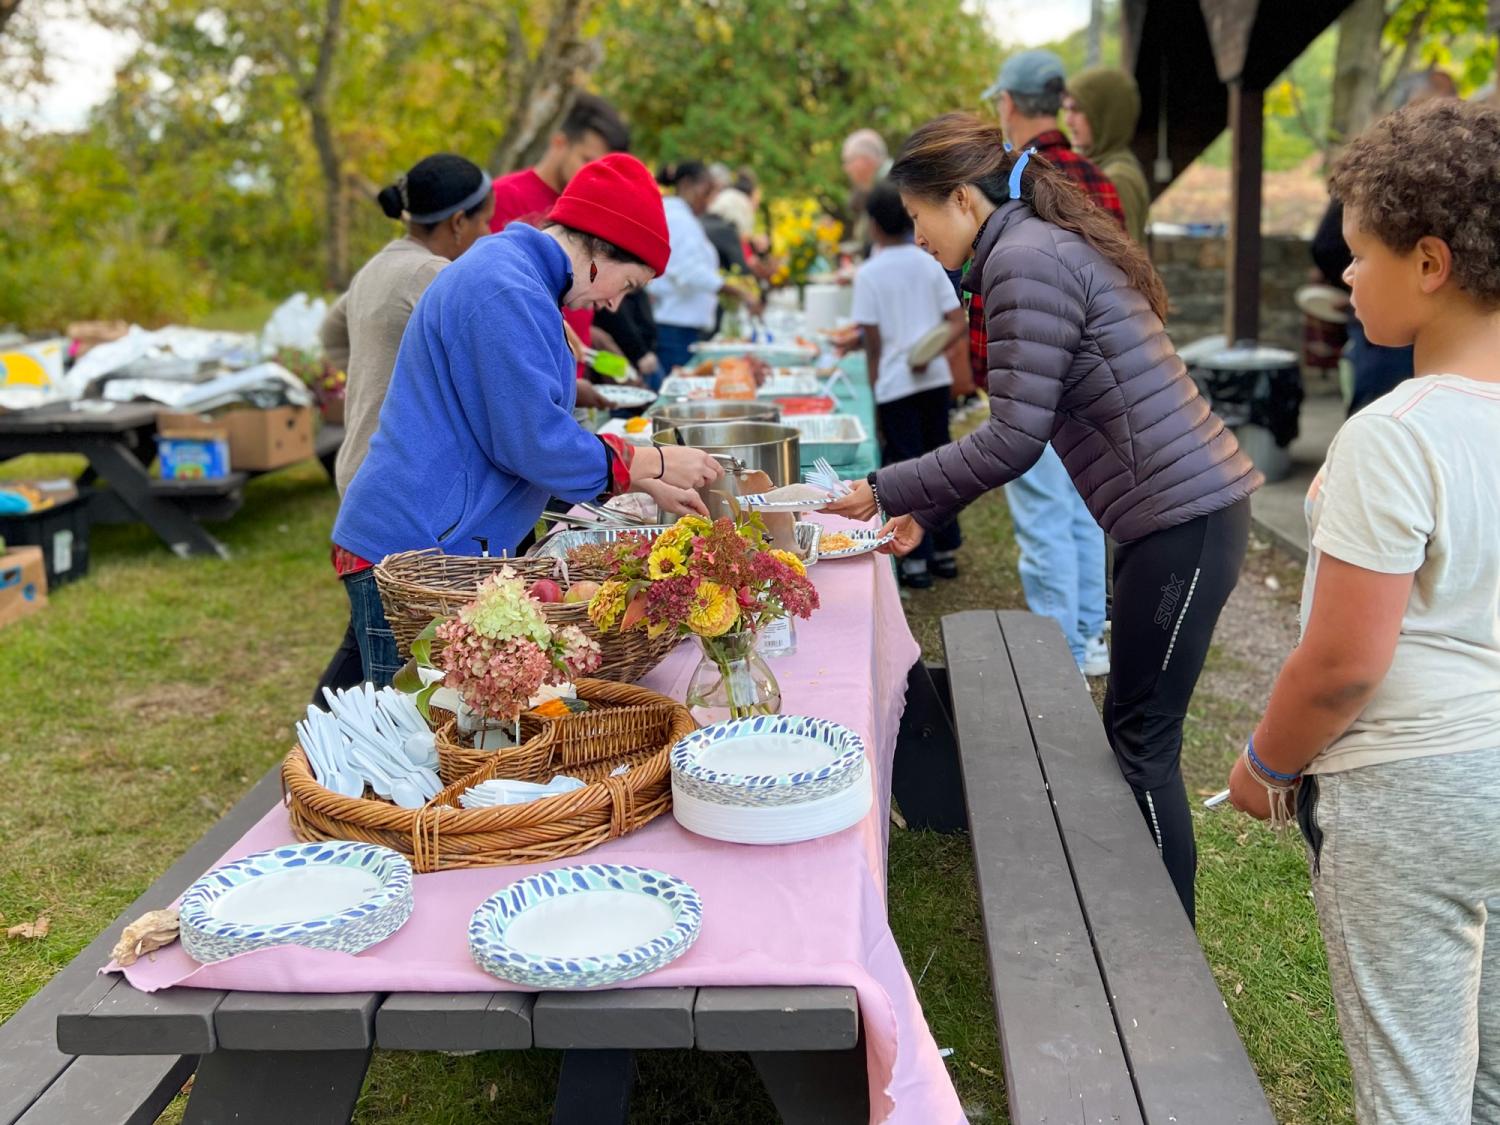 People line up at picnic tables, full of plates of food to share